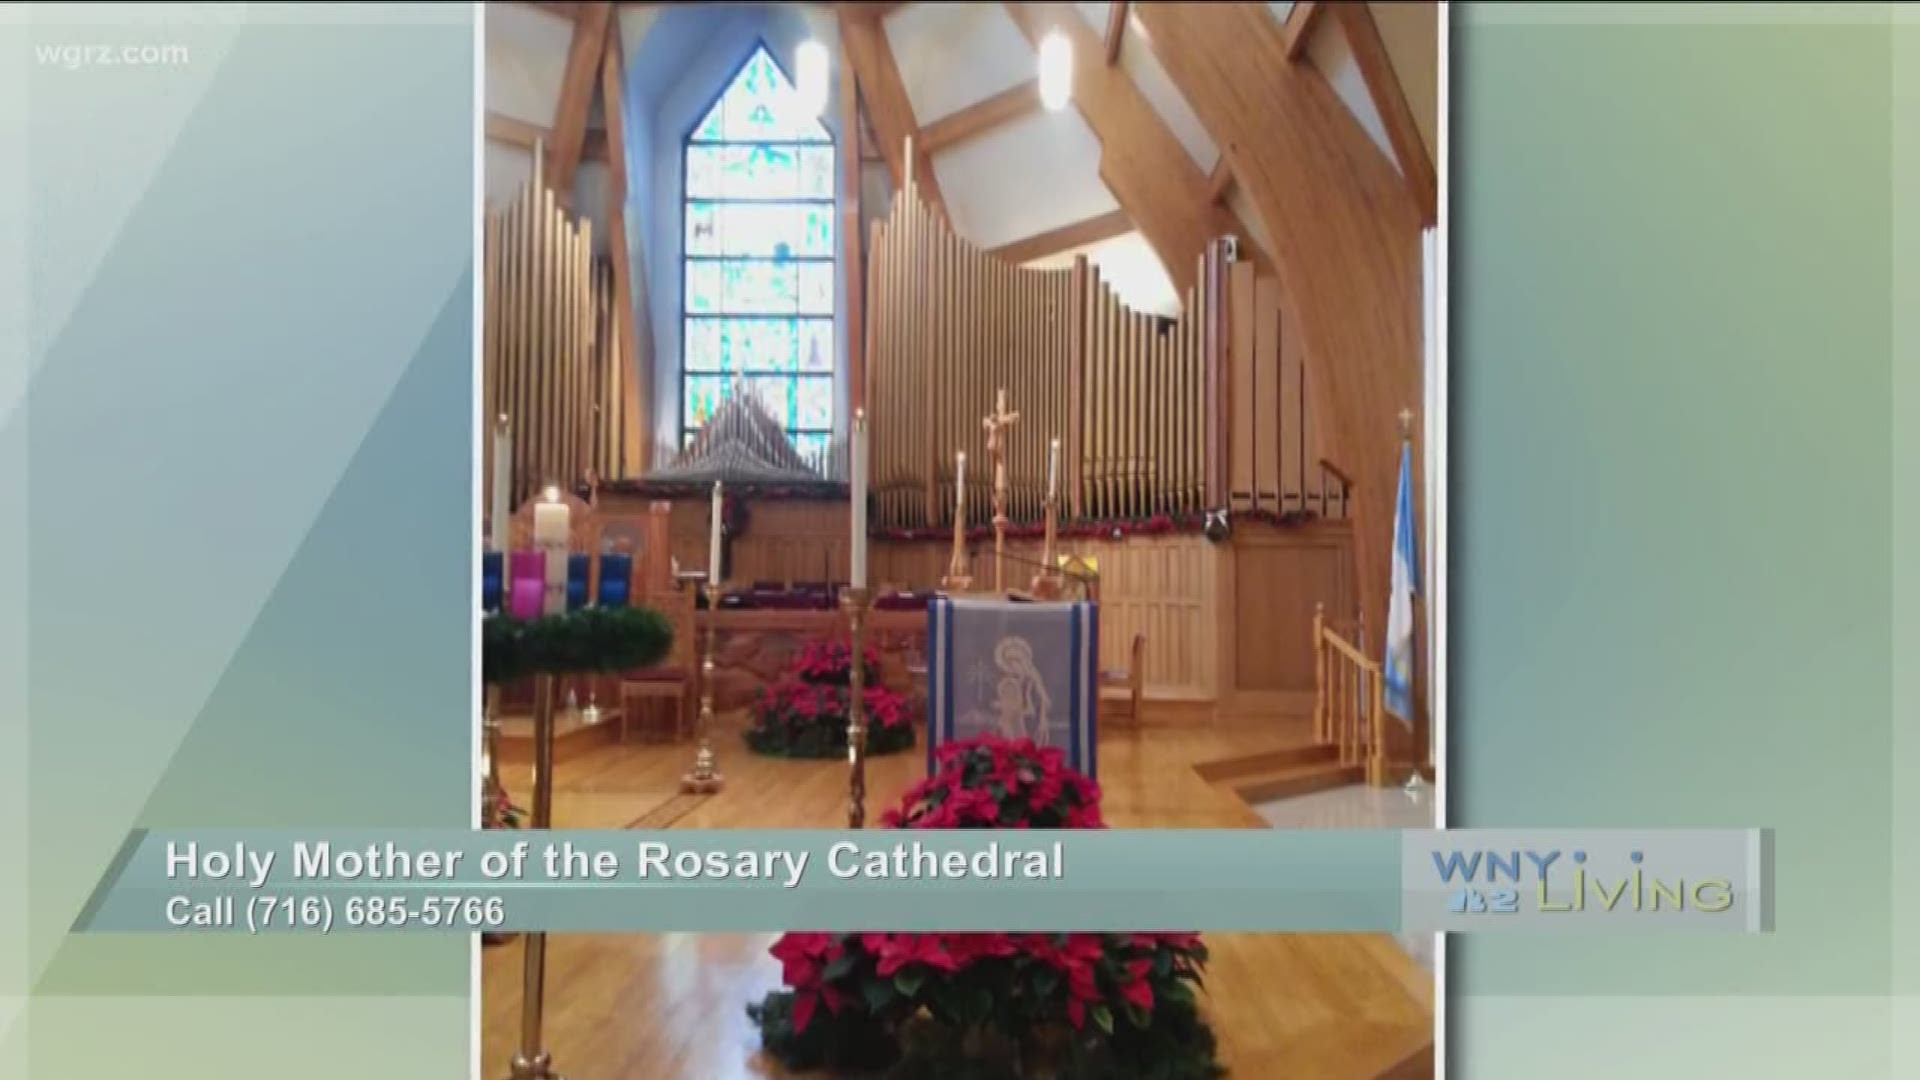 WNY Living - January 12 - Holy Mother of the Rosary Cathedral